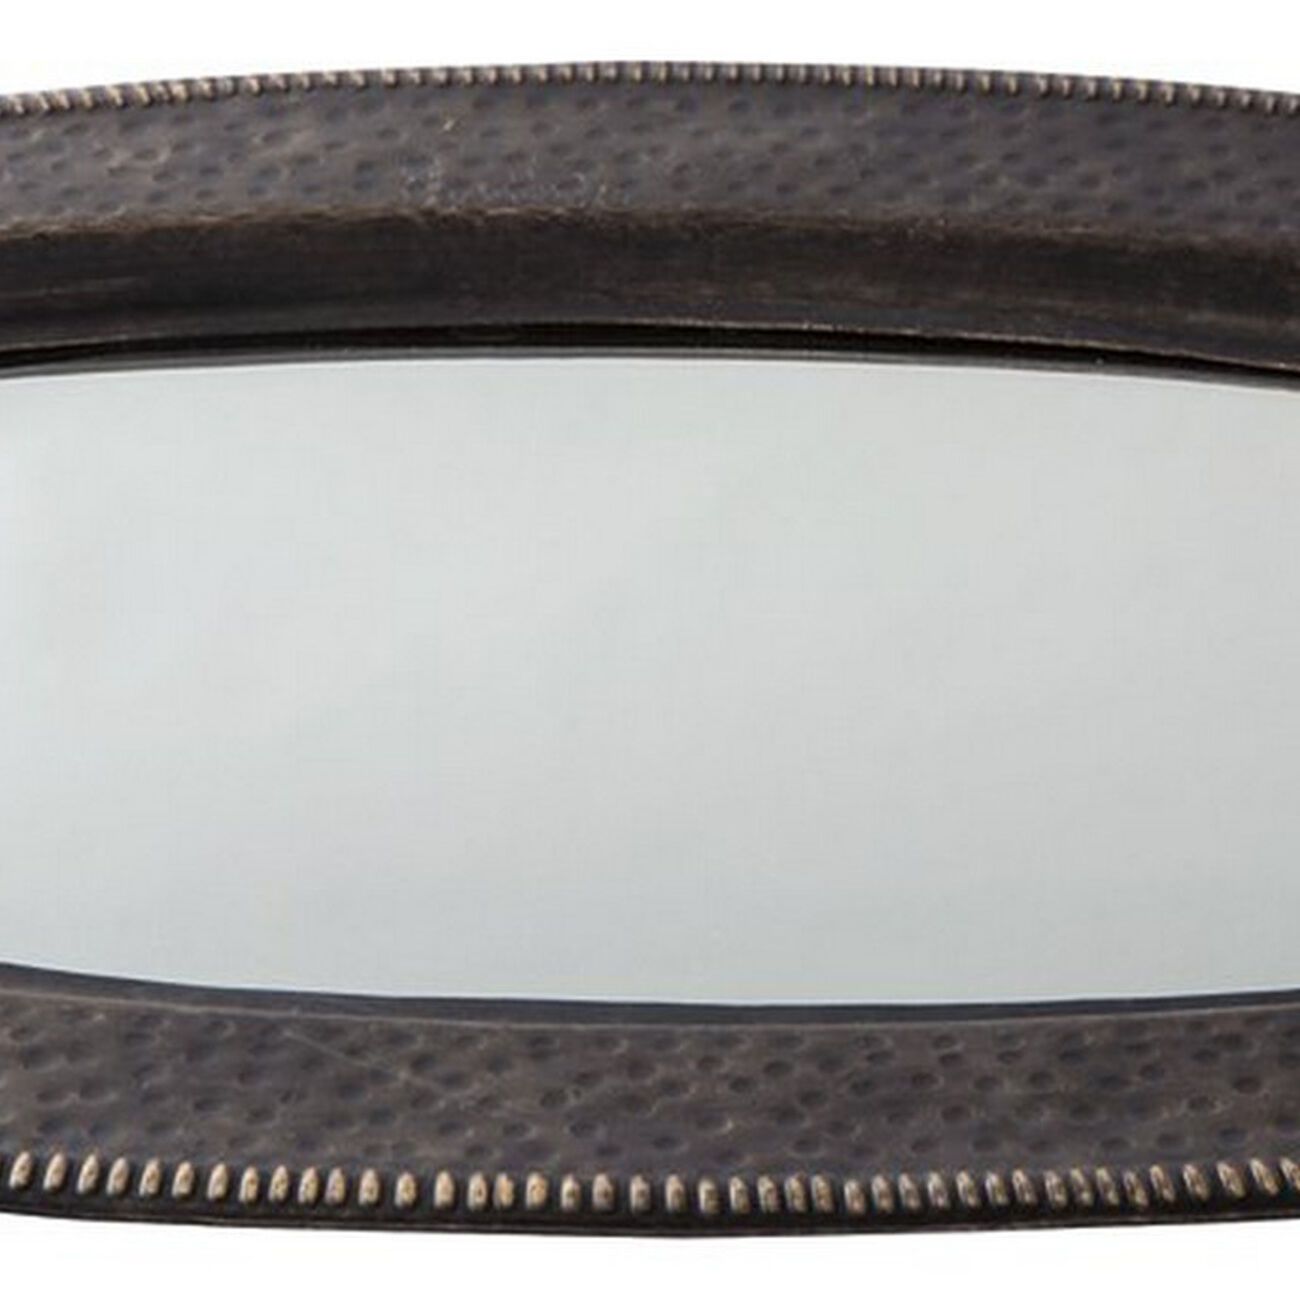 Oval Shape Tray with Mirror Trim and Braided Handle, Gray and Gold